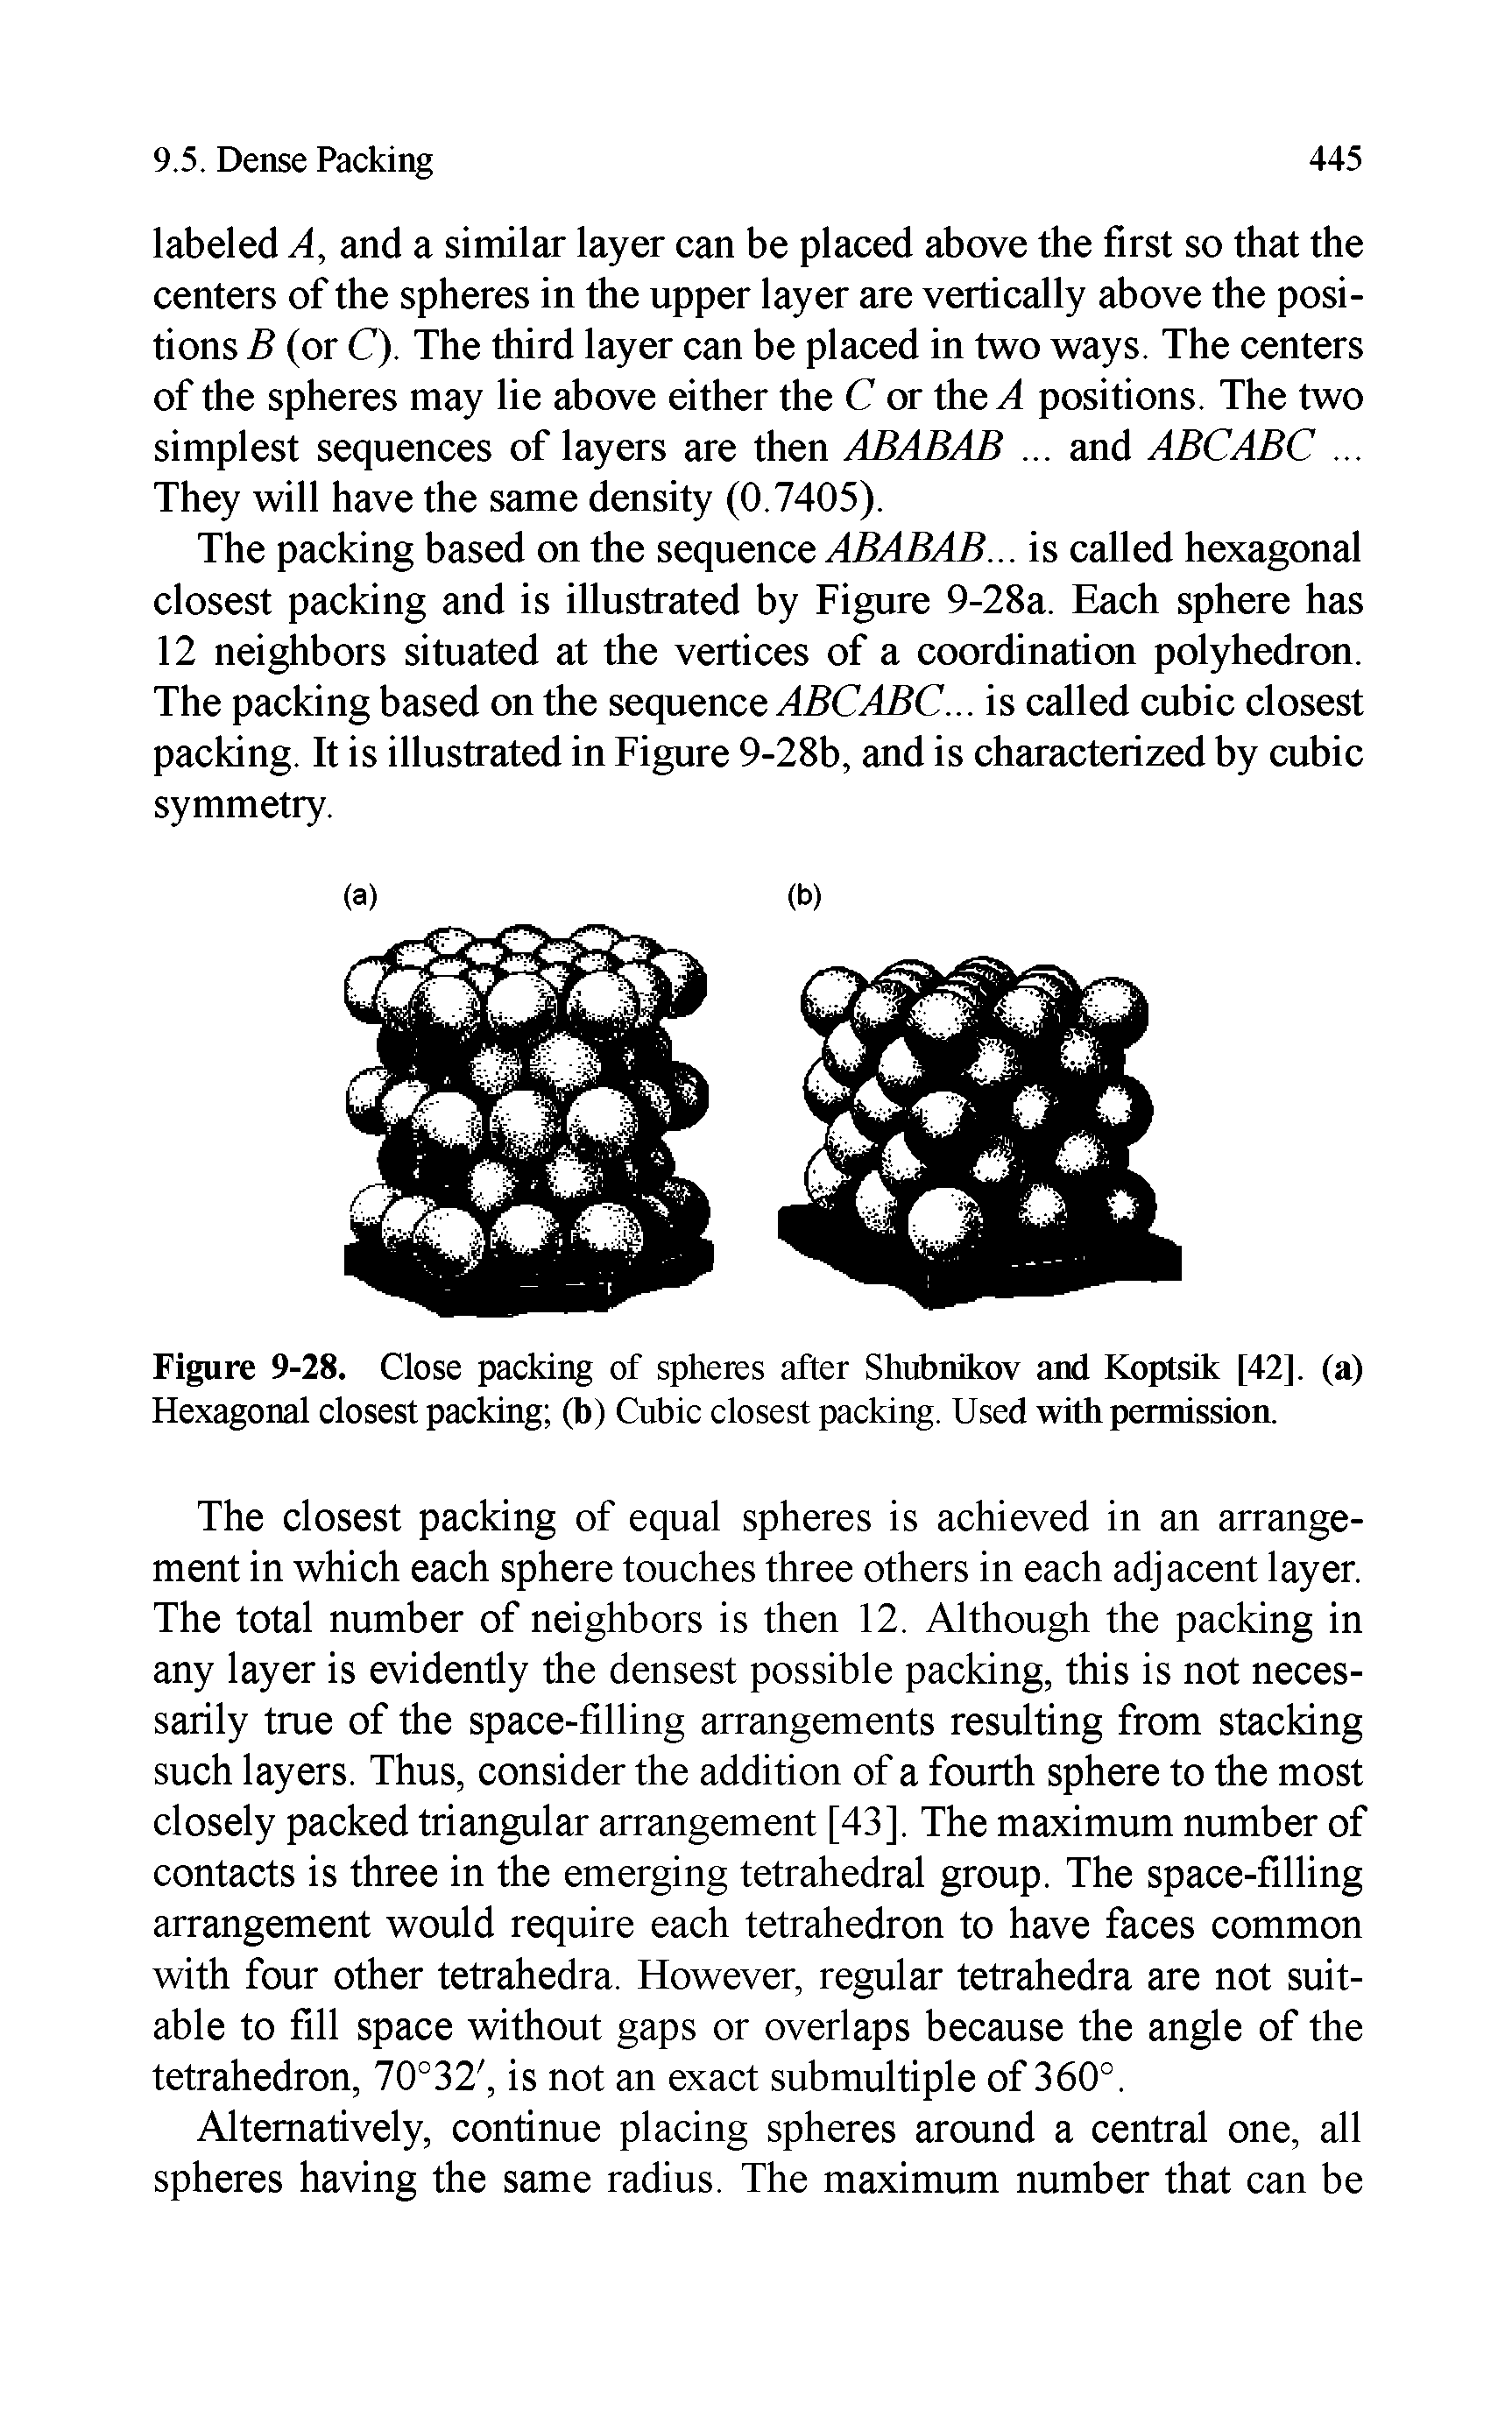 Figure 9-28. Close packing of spheres after Shubnikov and Koptsik [42], (a) Hexagonal closest packing (b) Cubic closest packing. Used with permission.